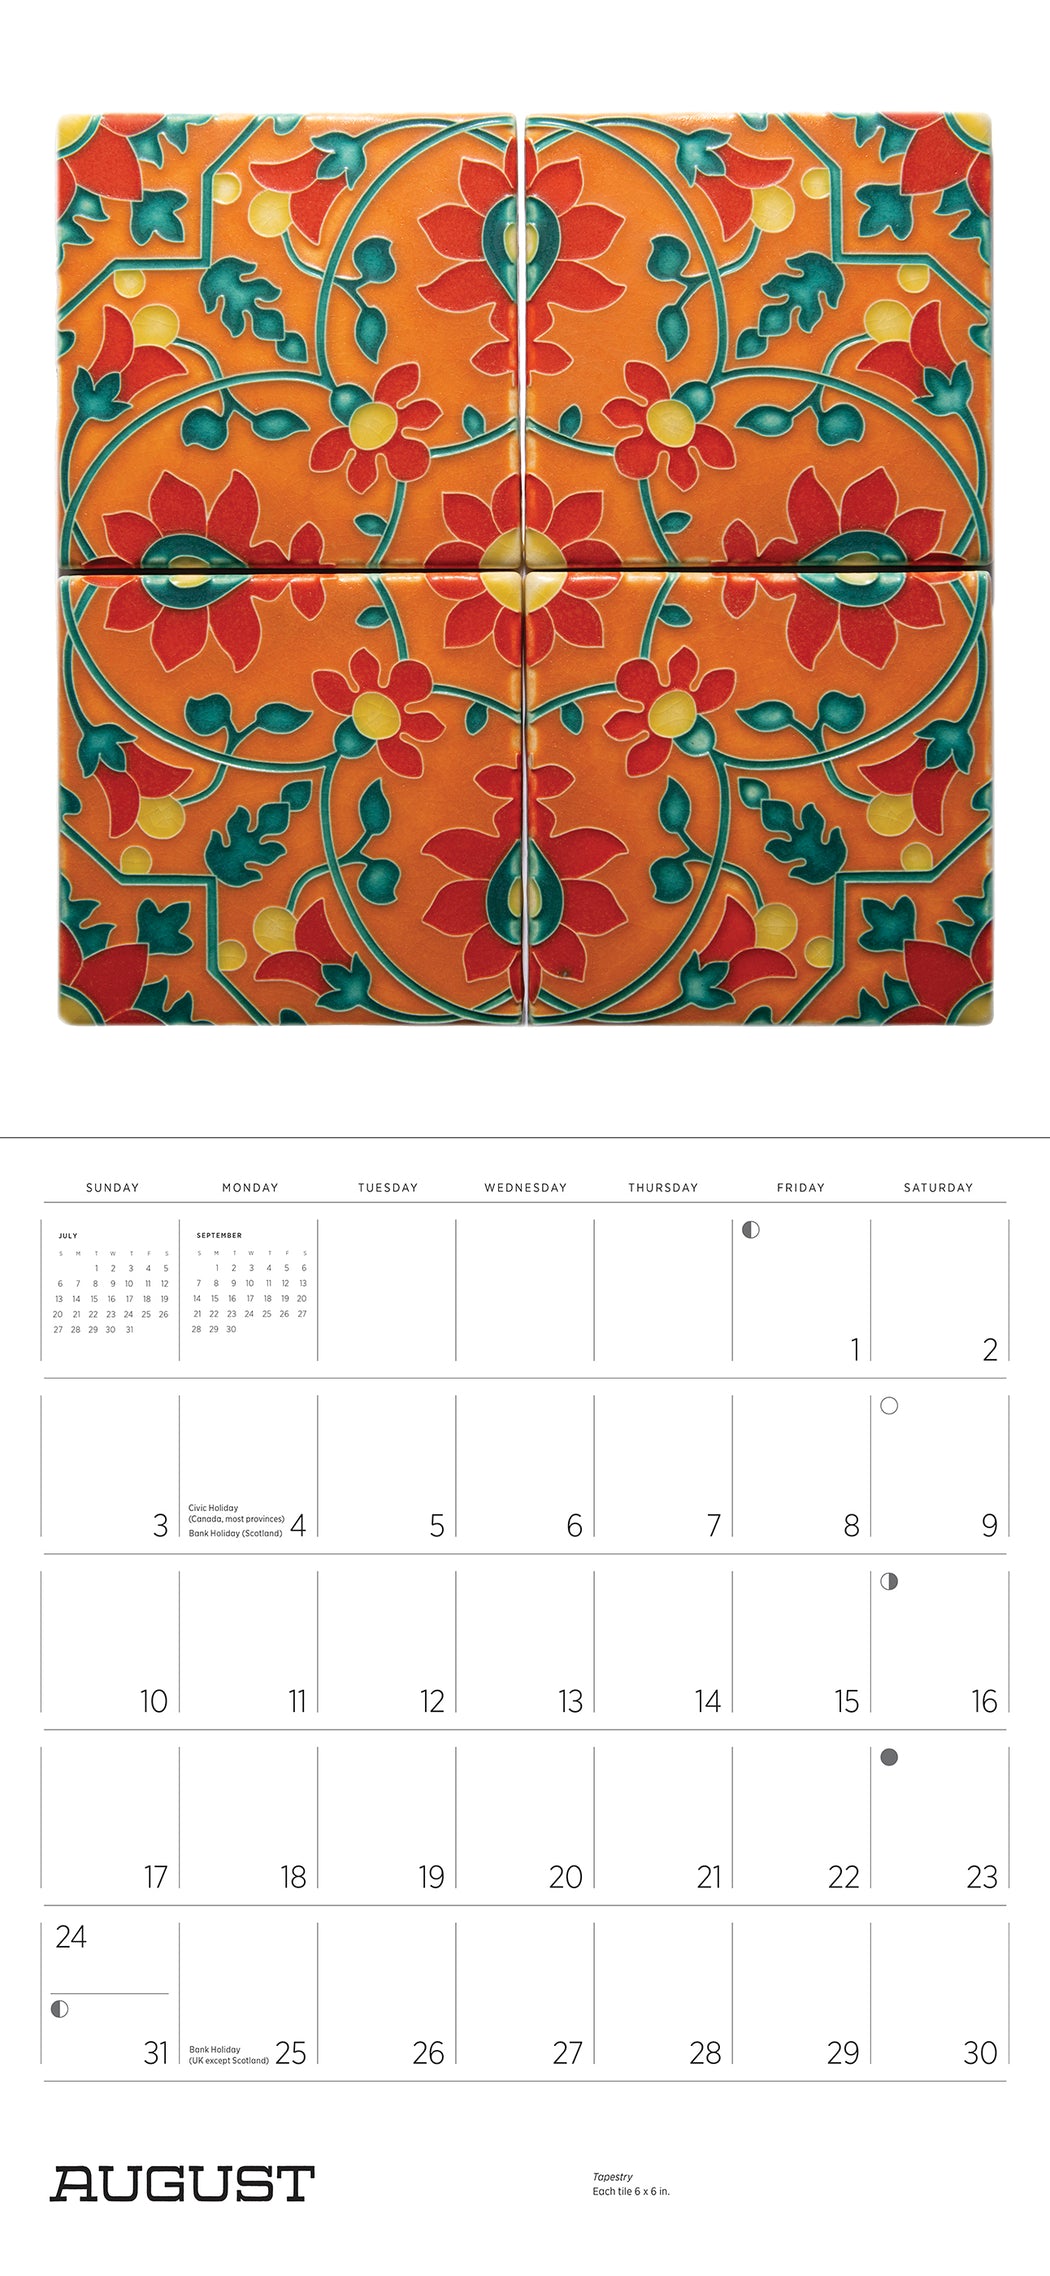 Arts & Crafts Tiles: Made by Motawi Tileworks 2025 Wall Calendar_Interior_2